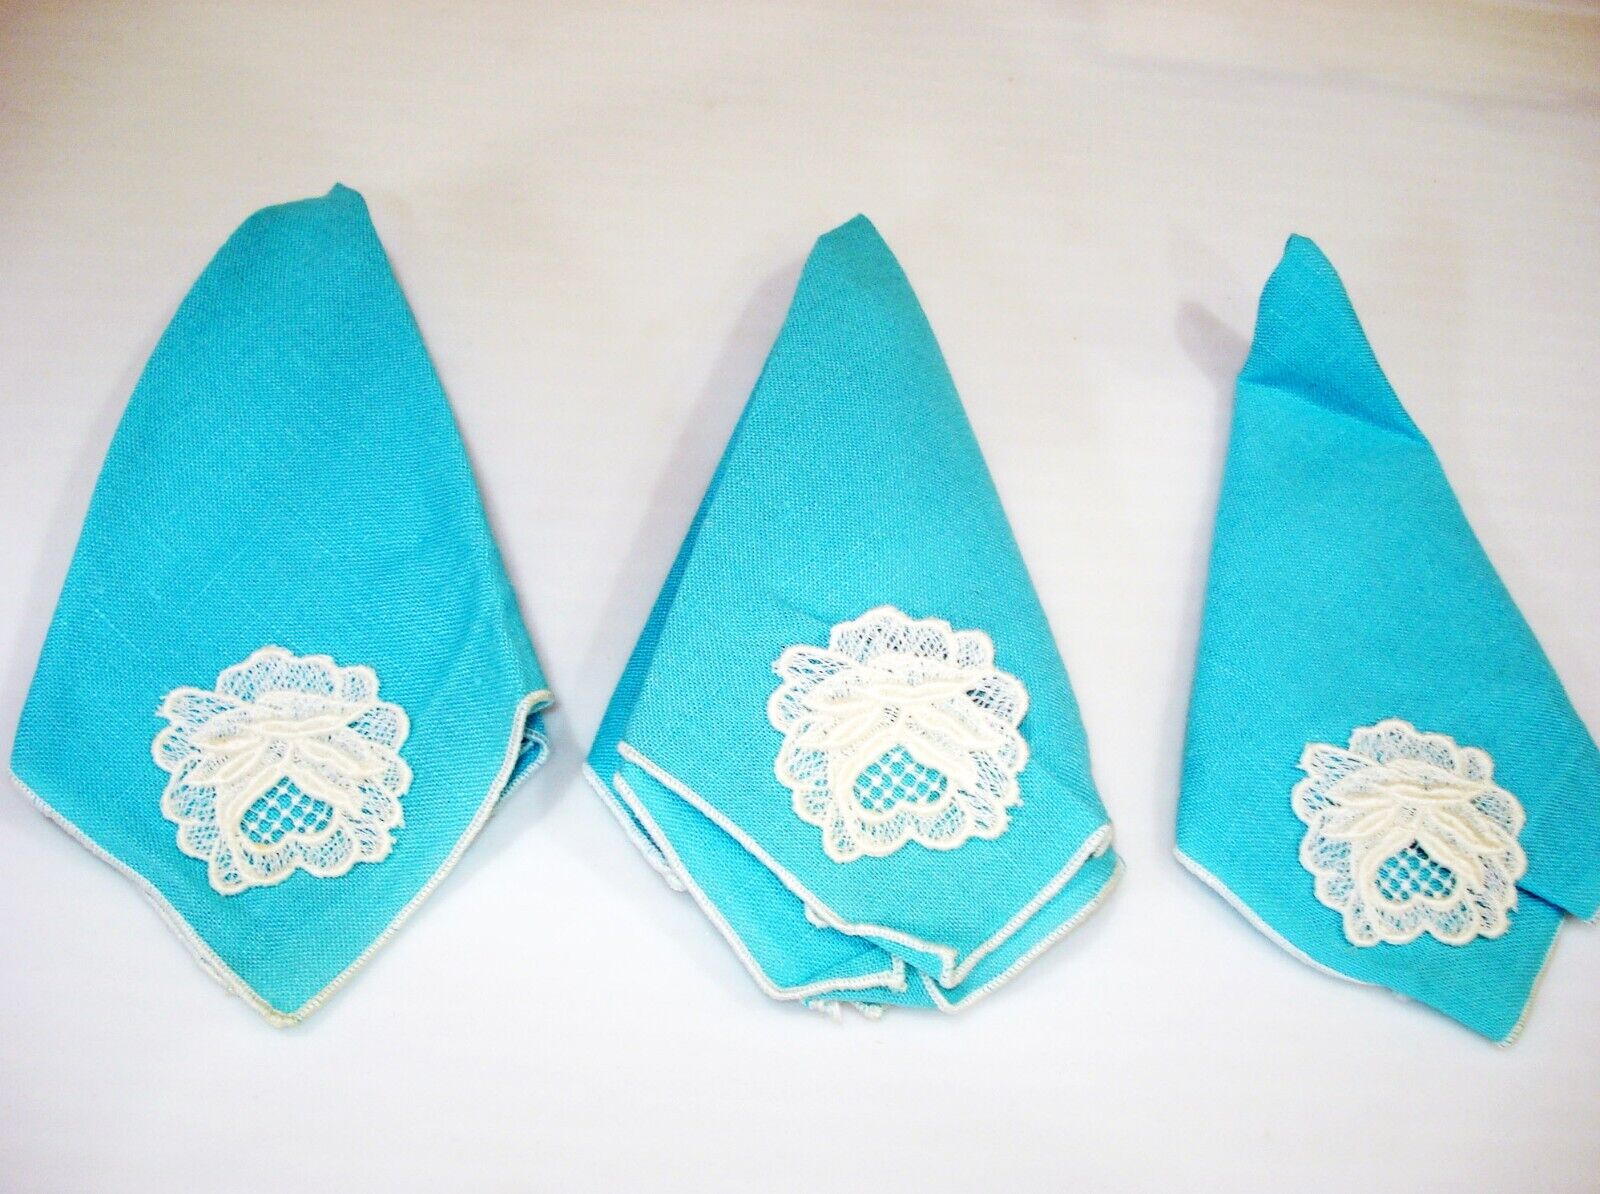 3  Teal Blue Napkins With White Embroibery Flowers